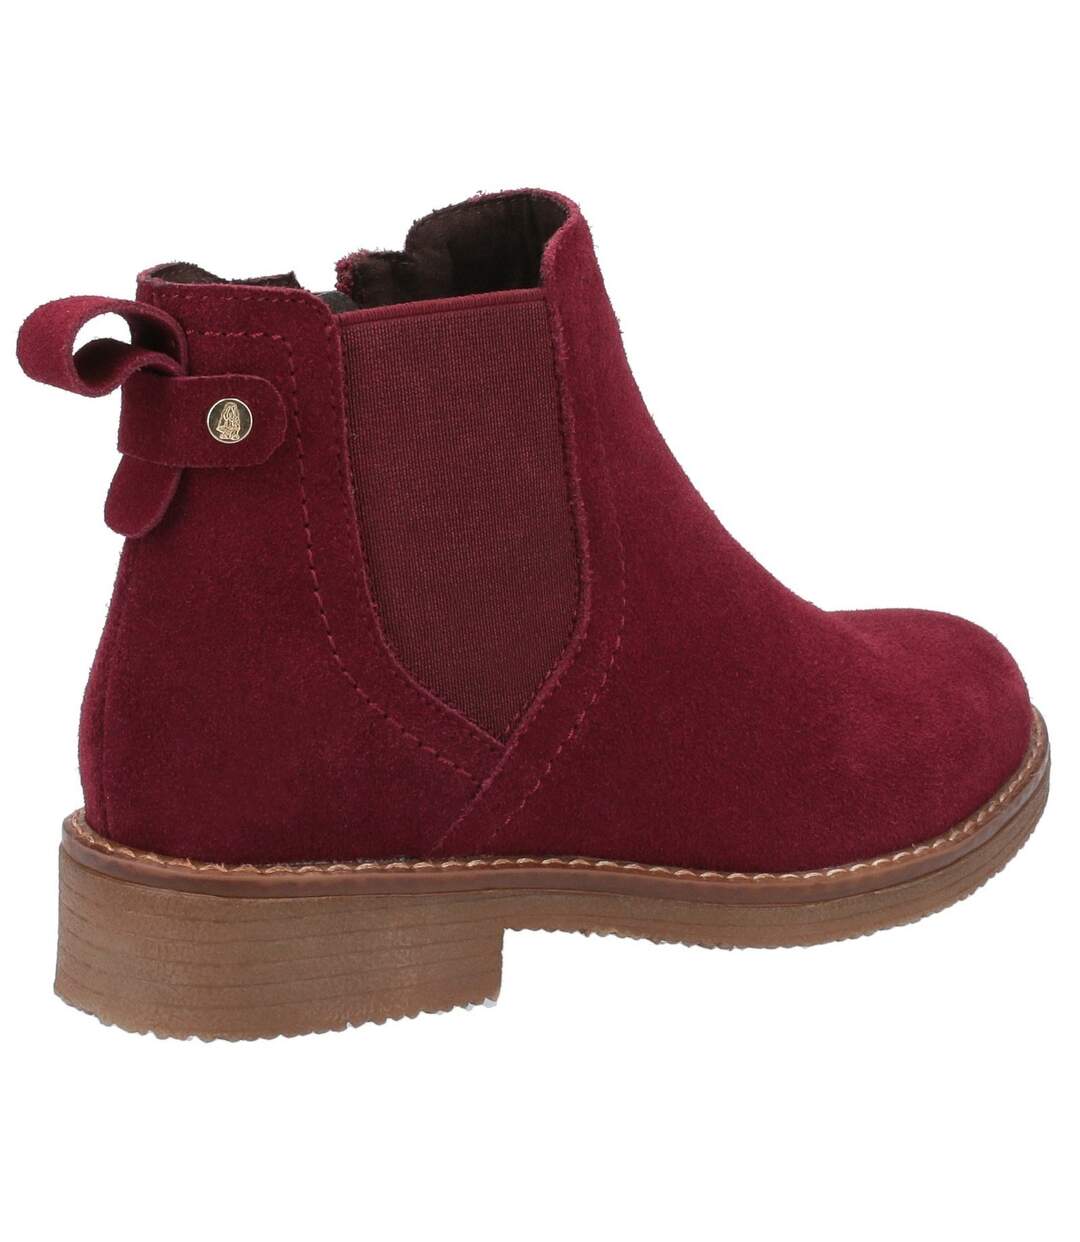 Hush Puppies Womens/Ladies Maddy Suede Ankle Boots (Bordeaux Red) - UTFS7392